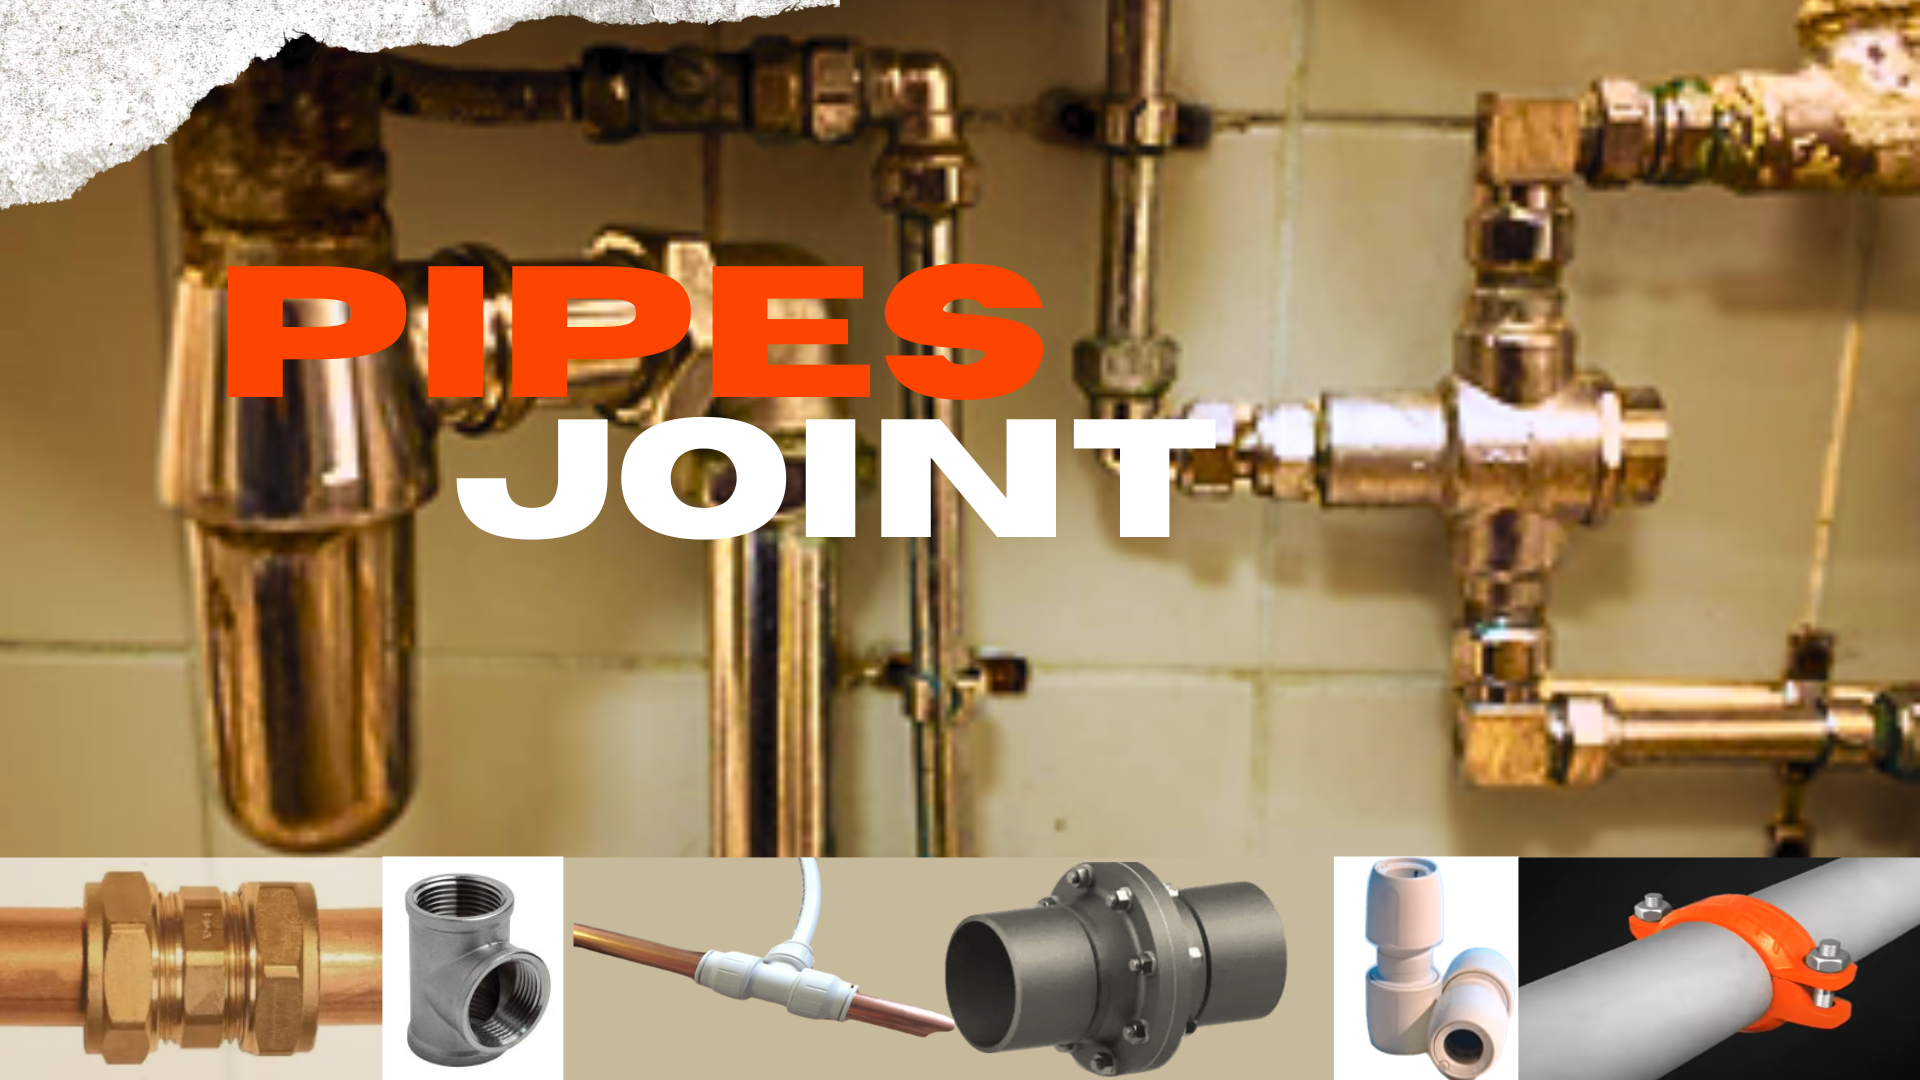 Types of Pipe Joints